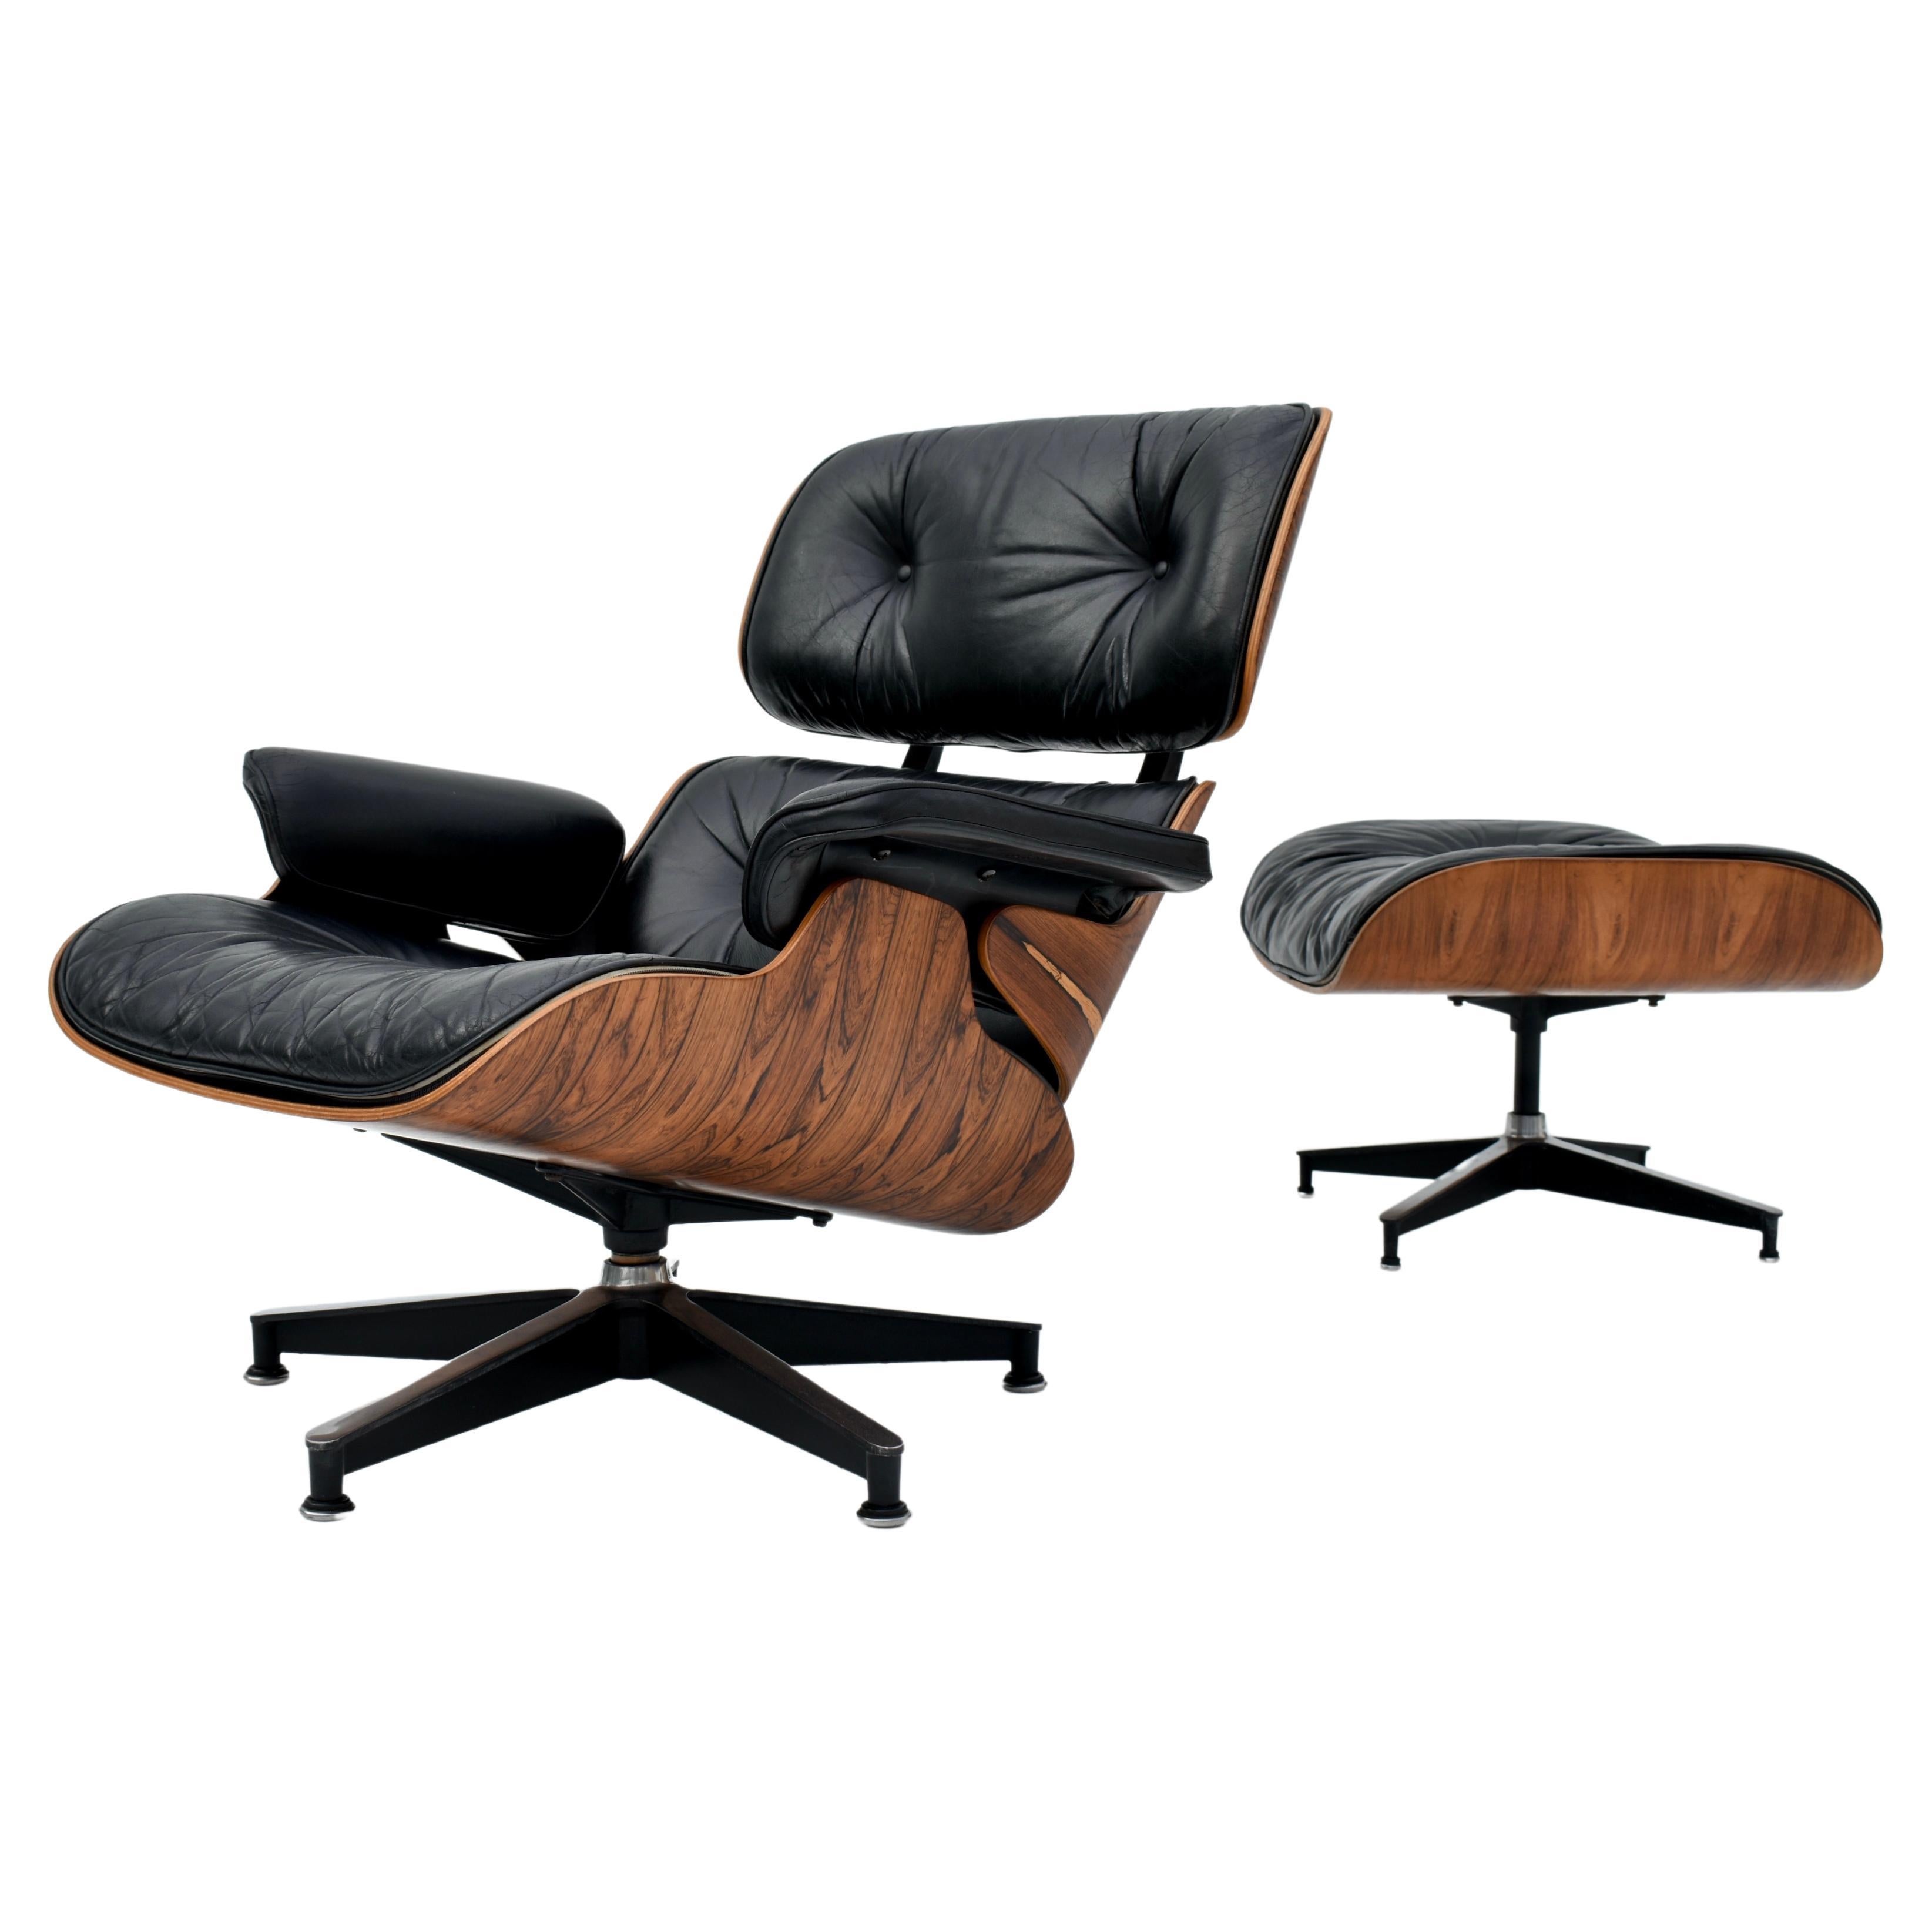 Original 1960's Production Eames Lounge Chair & Ottoman For Herman Miller